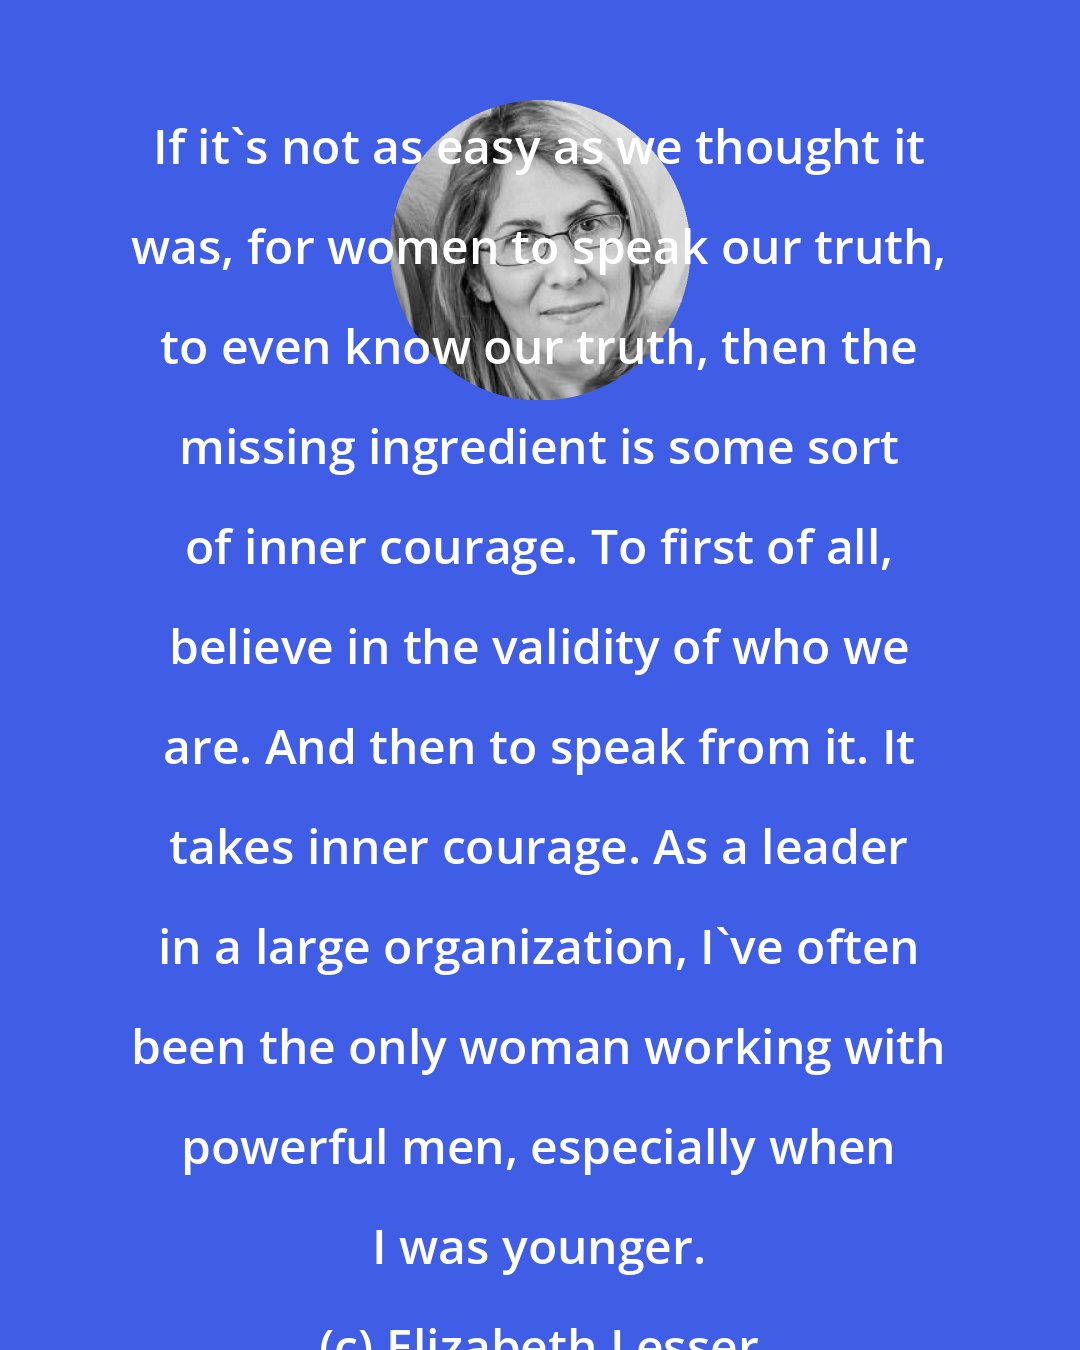 Elizabeth Lesser: If it's not as easy as we thought it was, for women to speak our truth, to even know our truth, then the missing ingredient is some sort of inner courage. To first of all, believe in the validity of who we are. And then to speak from it. It takes inner courage. As a leader in a large organization, I've often been the only woman working with powerful men, especially when I was younger.